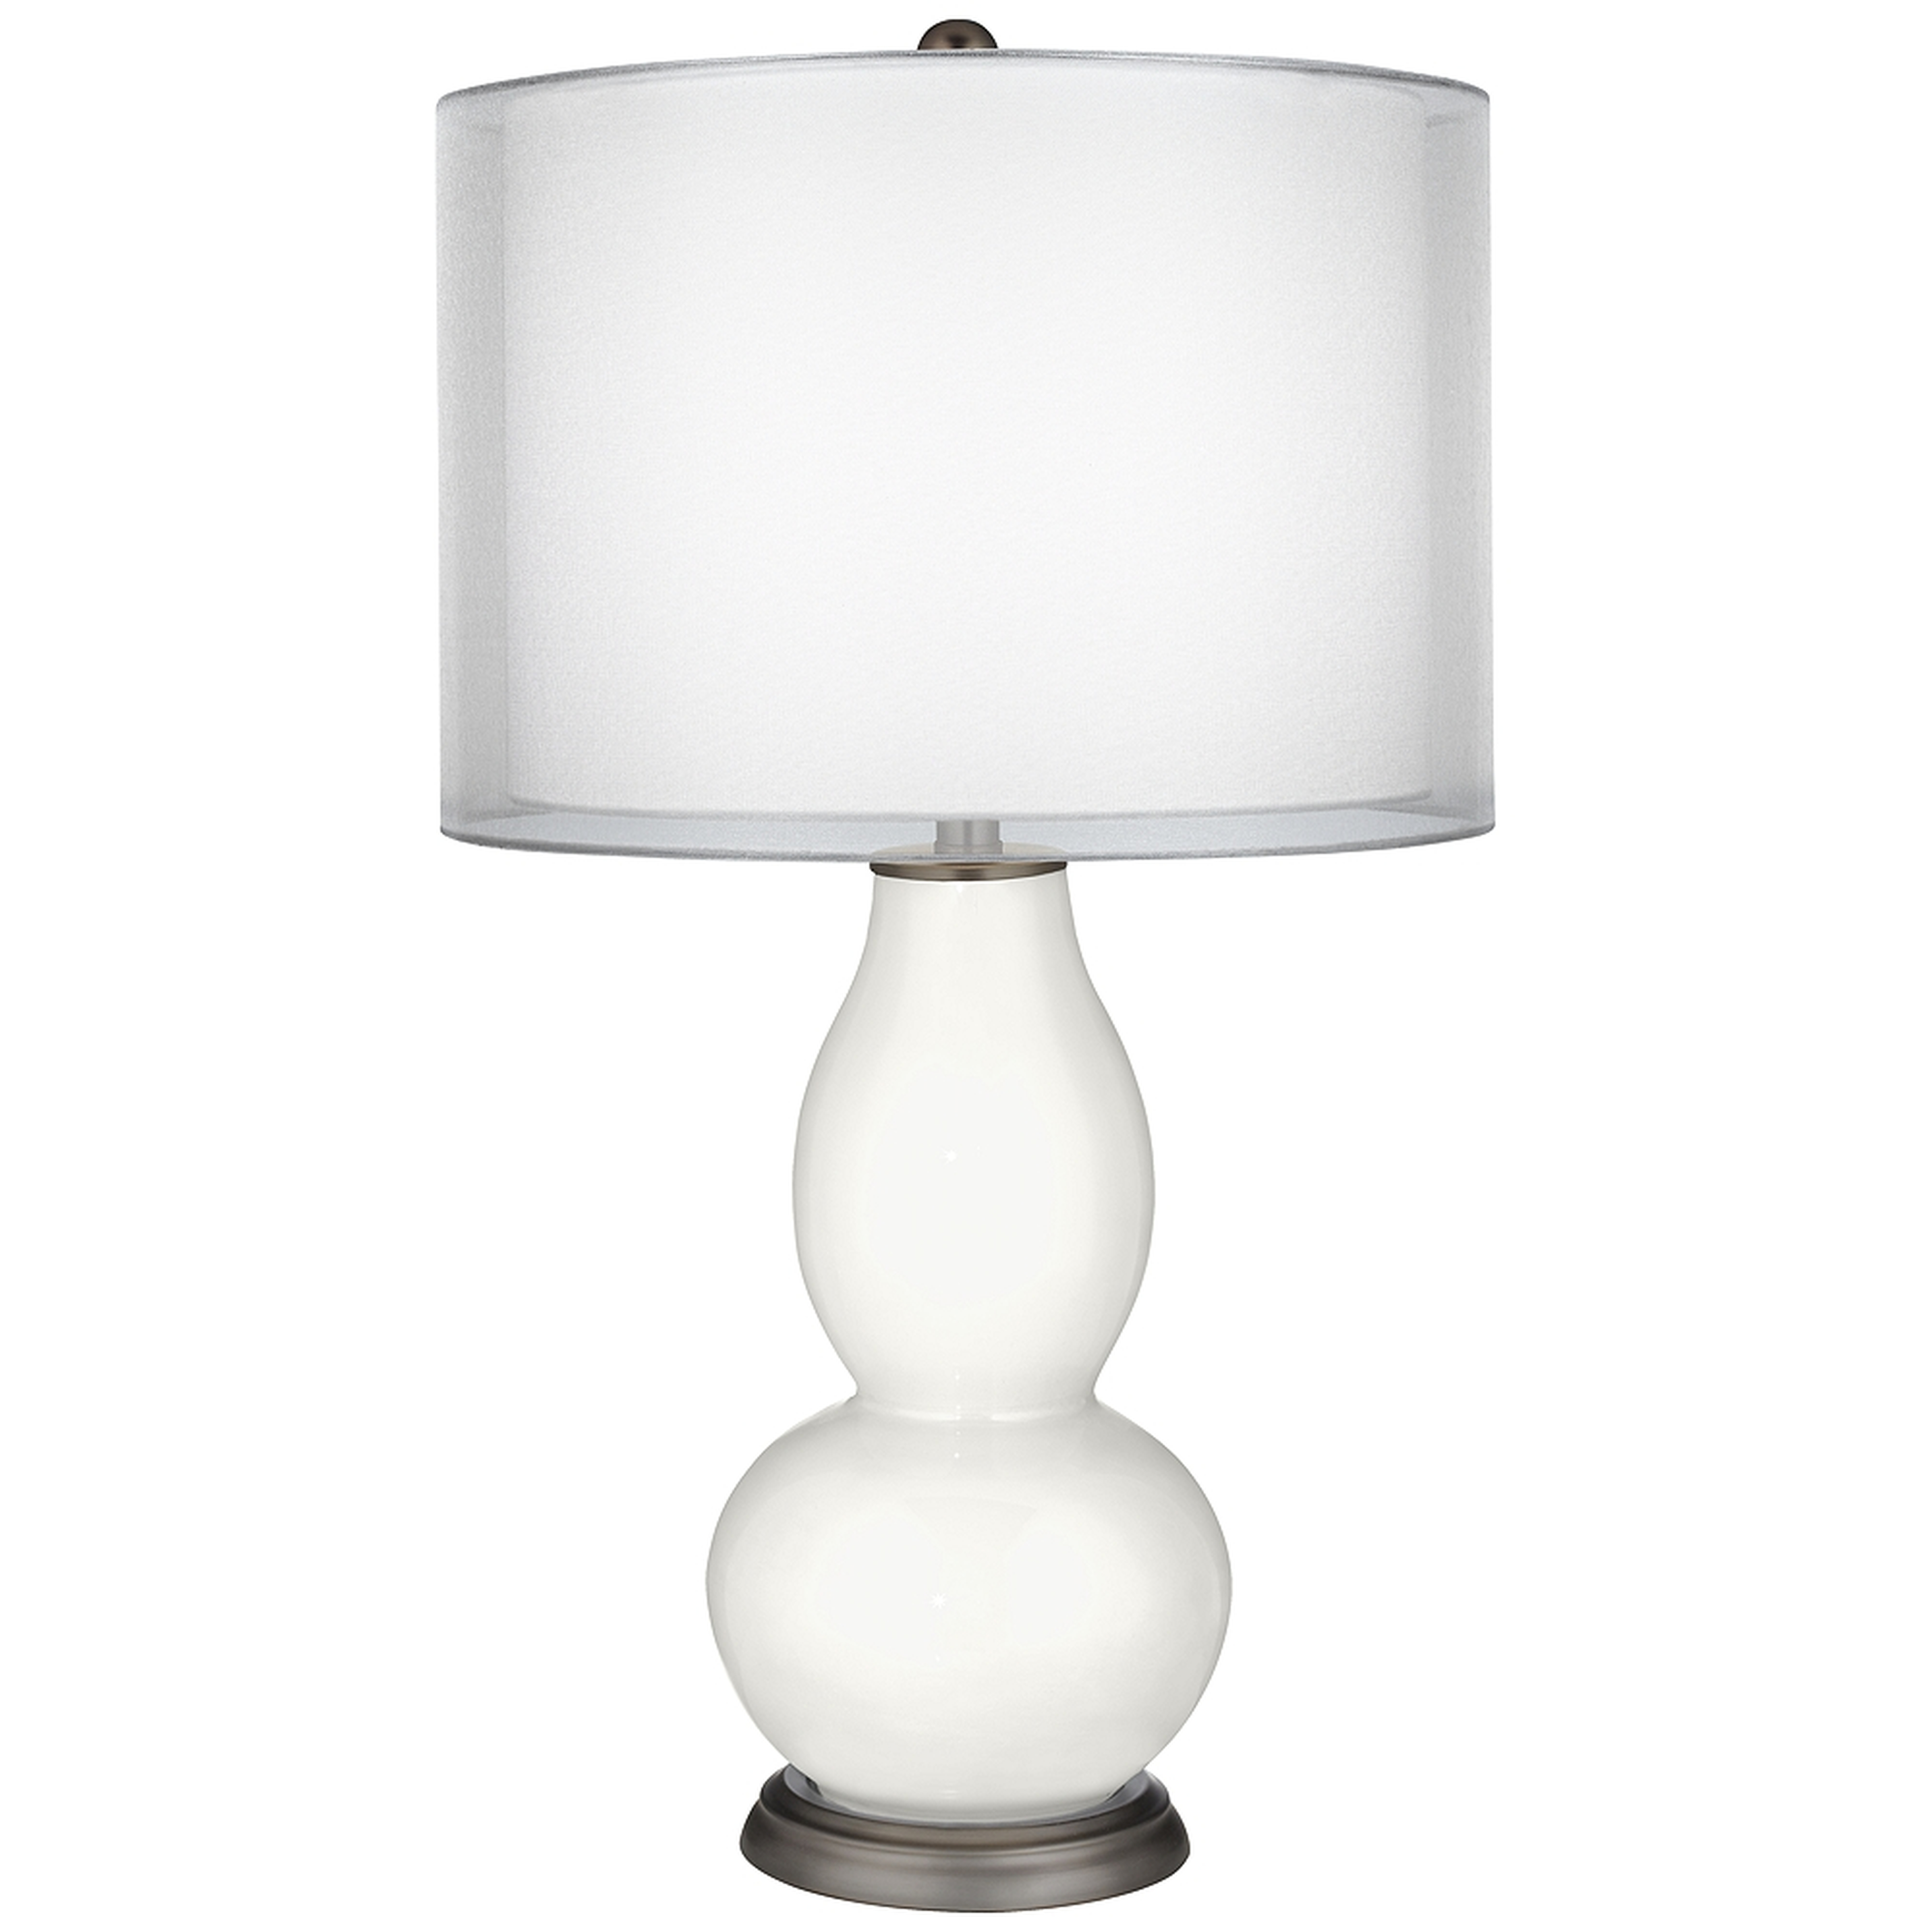 Winter White Sheer Double Shade Double Gourd Table Lamp - Style # 9V463 - Lamps Plus